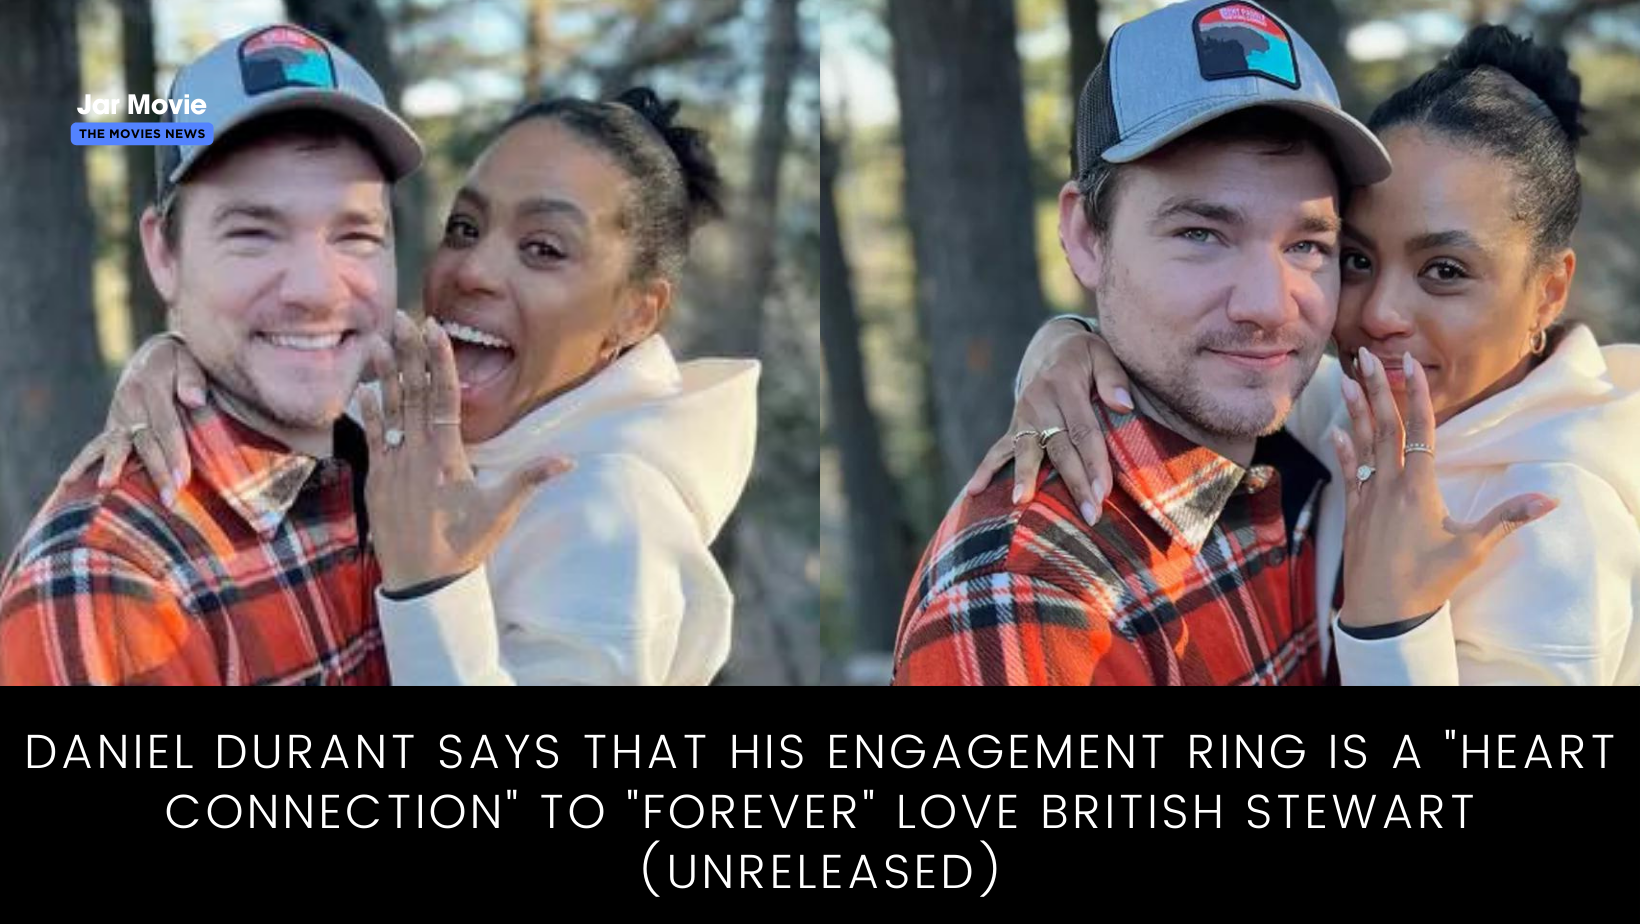 Daniel Durant Says That His Engagement Ring Is a "Heart Connection" to "Forever" Love British Stewart (Unreleased)